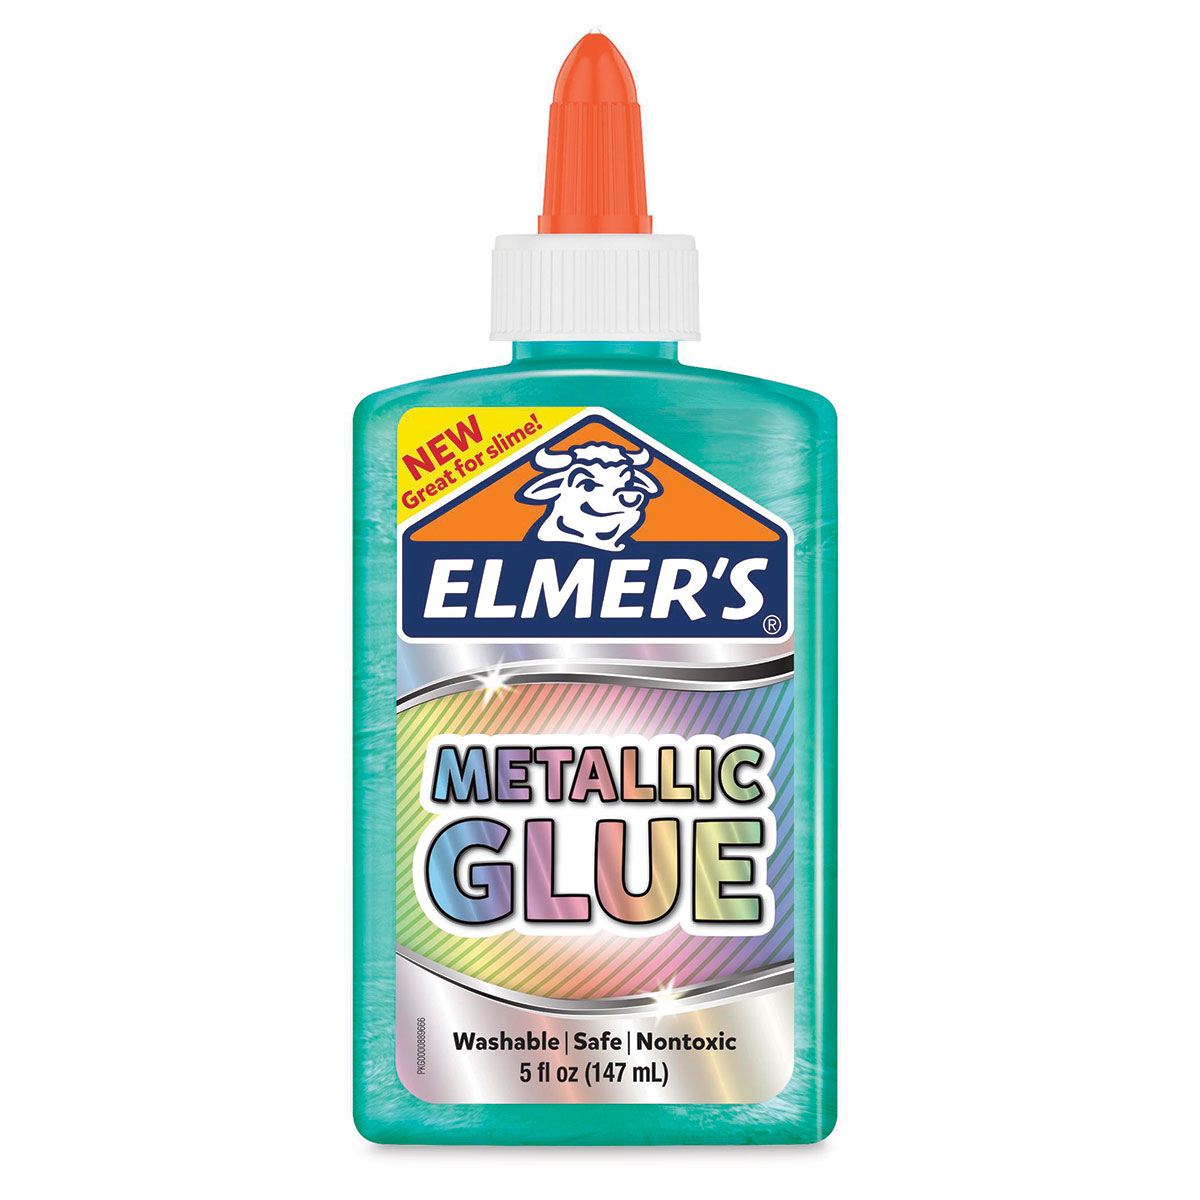 Elmer's Non Toxic Washable Glow in the Dark Glue (Best for Slime) [147ML /  5OZ]